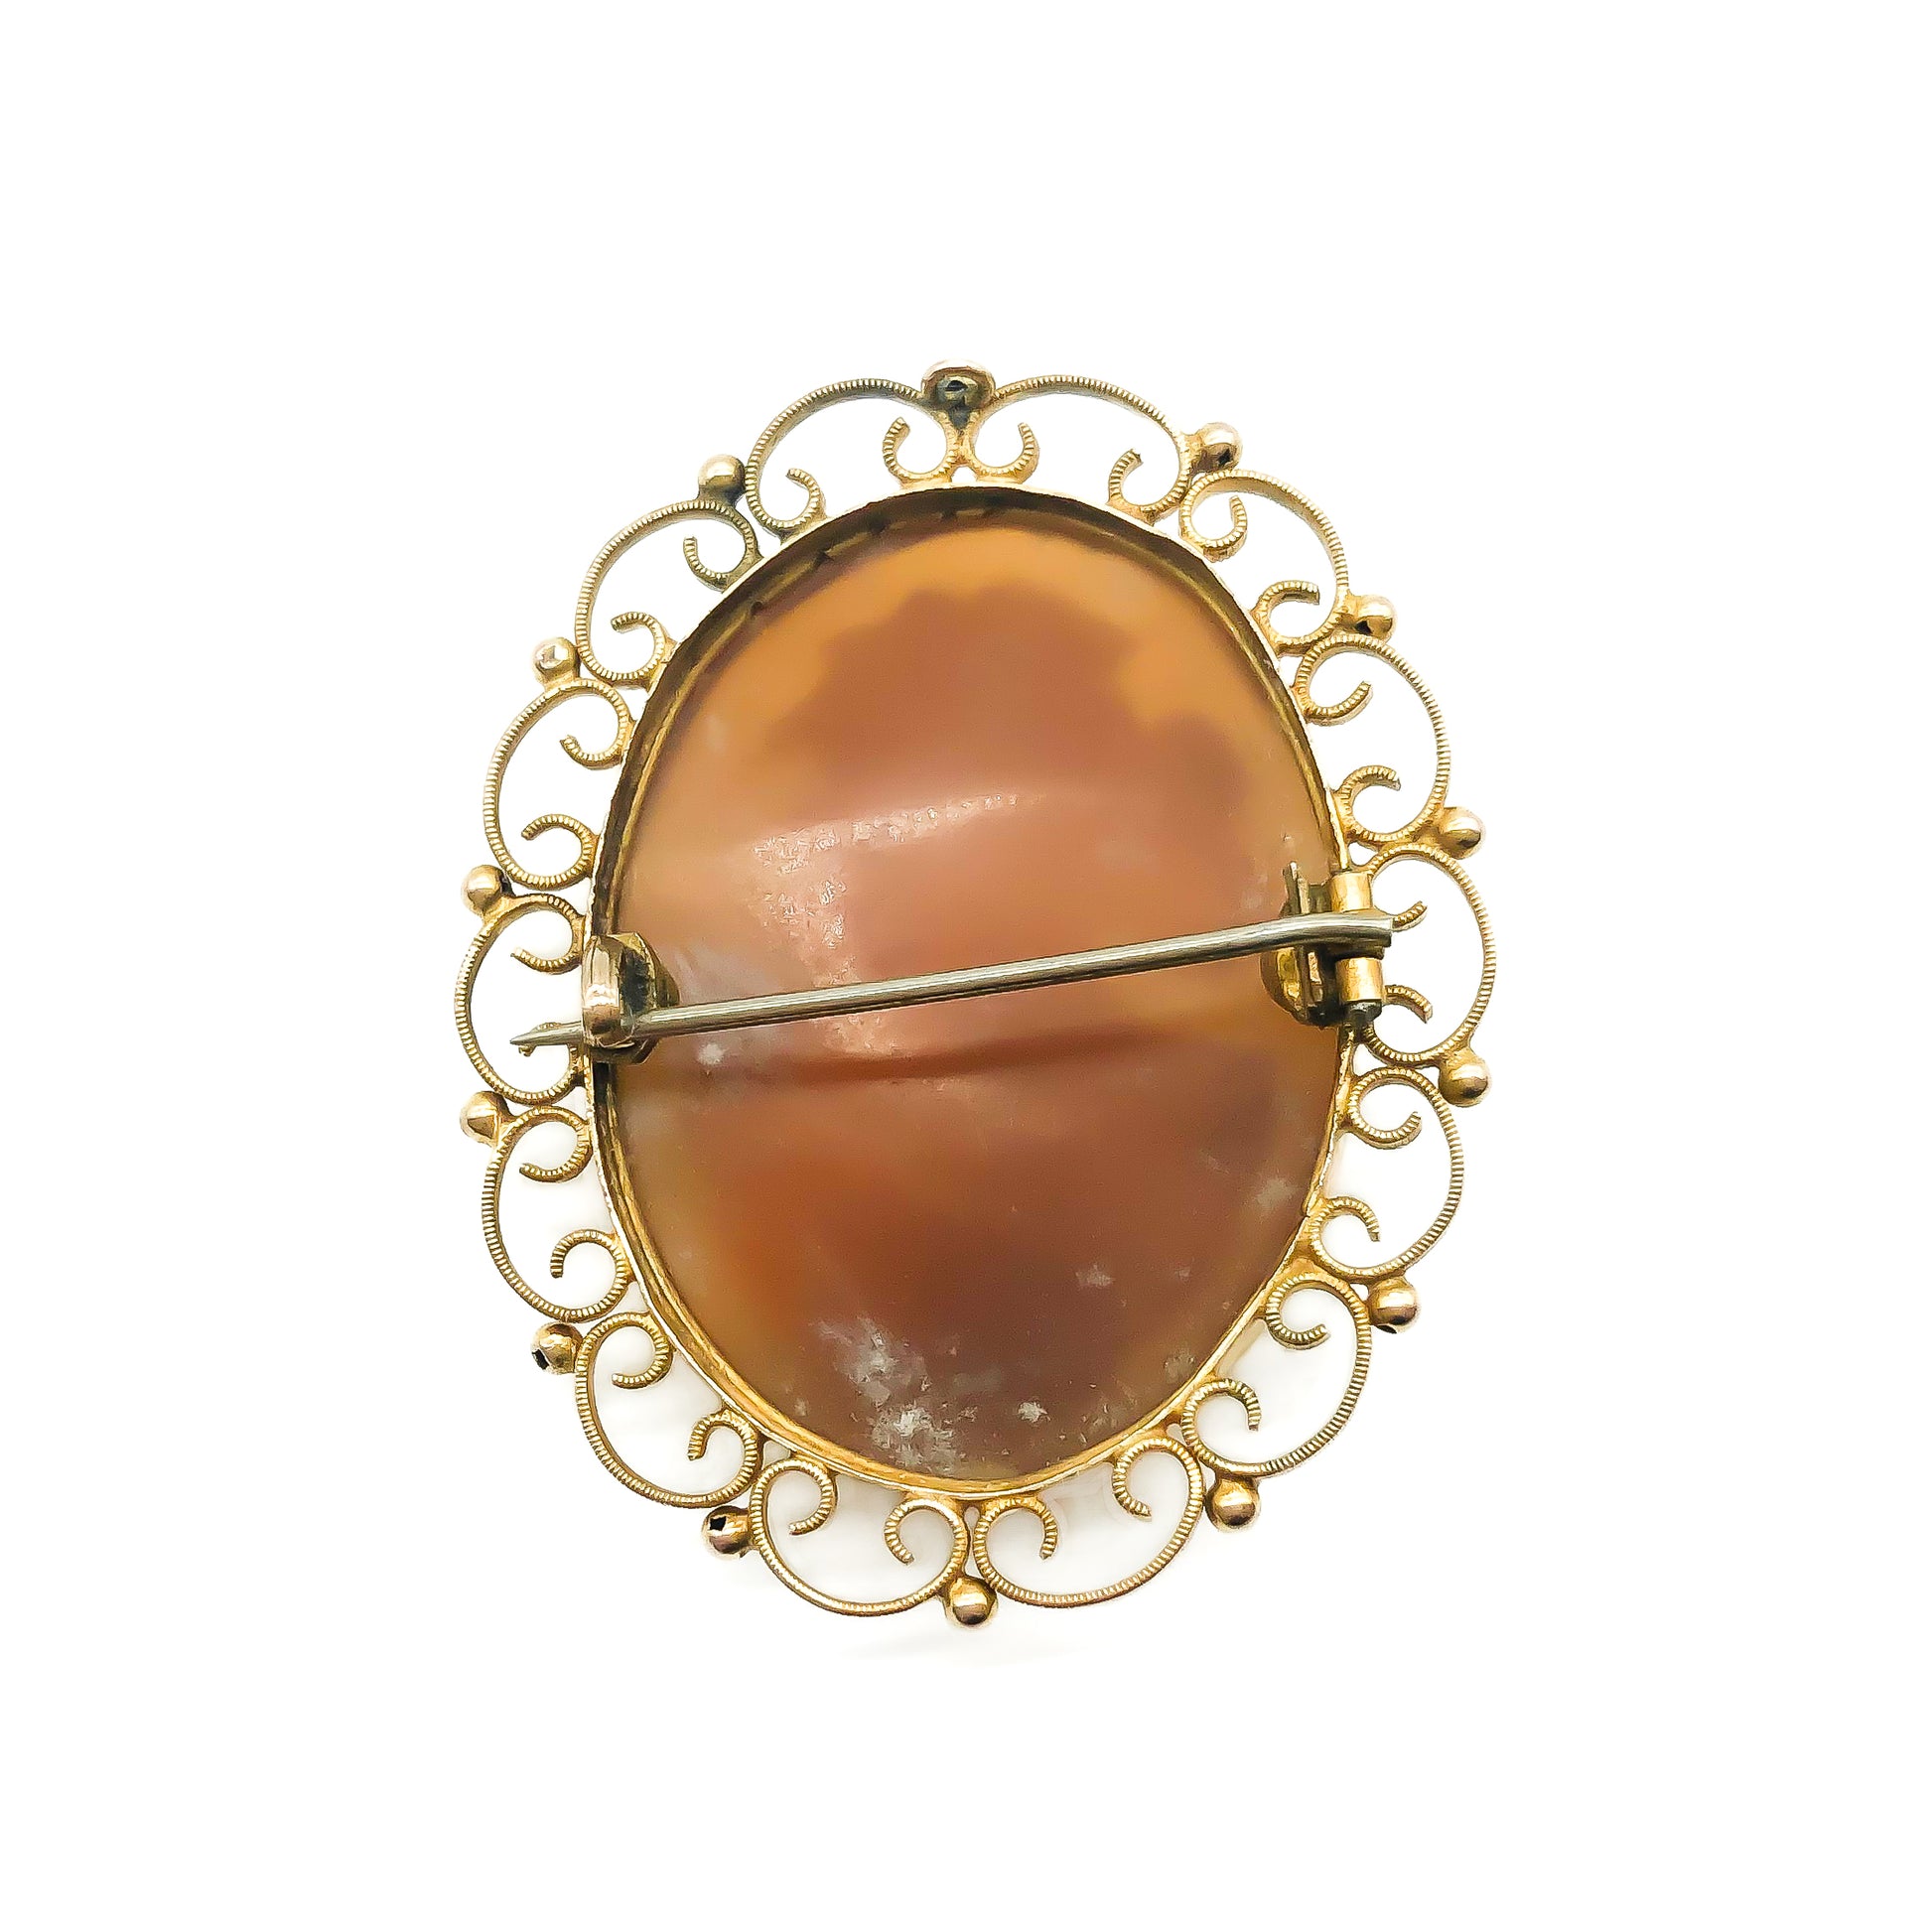 Beautifully carved Edwardian cameo brooch with an ornate 9ct gold frame.